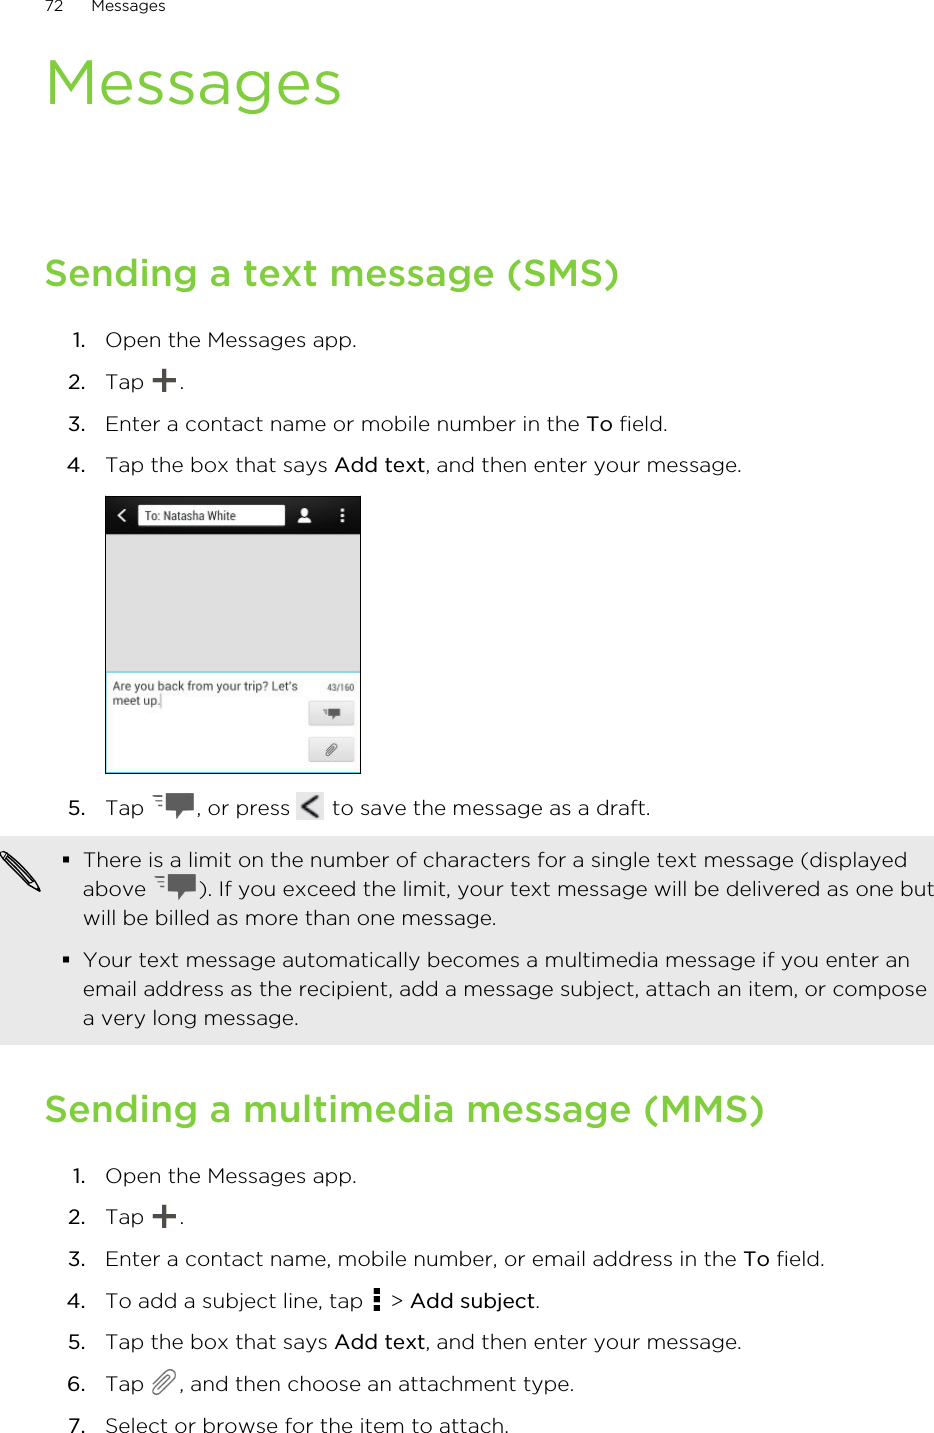 MessagesSending a text message (SMS)1. Open the Messages app.2. Tap  .3. Enter a contact name or mobile number in the To field.4. Tap the box that says Add text, and then enter your message. 5. Tap  , or press   to save the message as a draft. §There is a limit on the number of characters for a single text message (displayedabove  ). If you exceed the limit, your text message will be delivered as one butwill be billed as more than one message.§Your text message automatically becomes a multimedia message if you enter anemail address as the recipient, add a message subject, attach an item, or composea very long message.Sending a multimedia message (MMS)1. Open the Messages app.2. Tap  .3. Enter a contact name, mobile number, or email address in the To field.4. To add a subject line, tap   &gt; Add subject.5. Tap the box that says Add text, and then enter your message.6. Tap  , and then choose an attachment type.7. Select or browse for the item to attach.72 MessagesHTC Confidential for Certification HTC Confidential for Certification